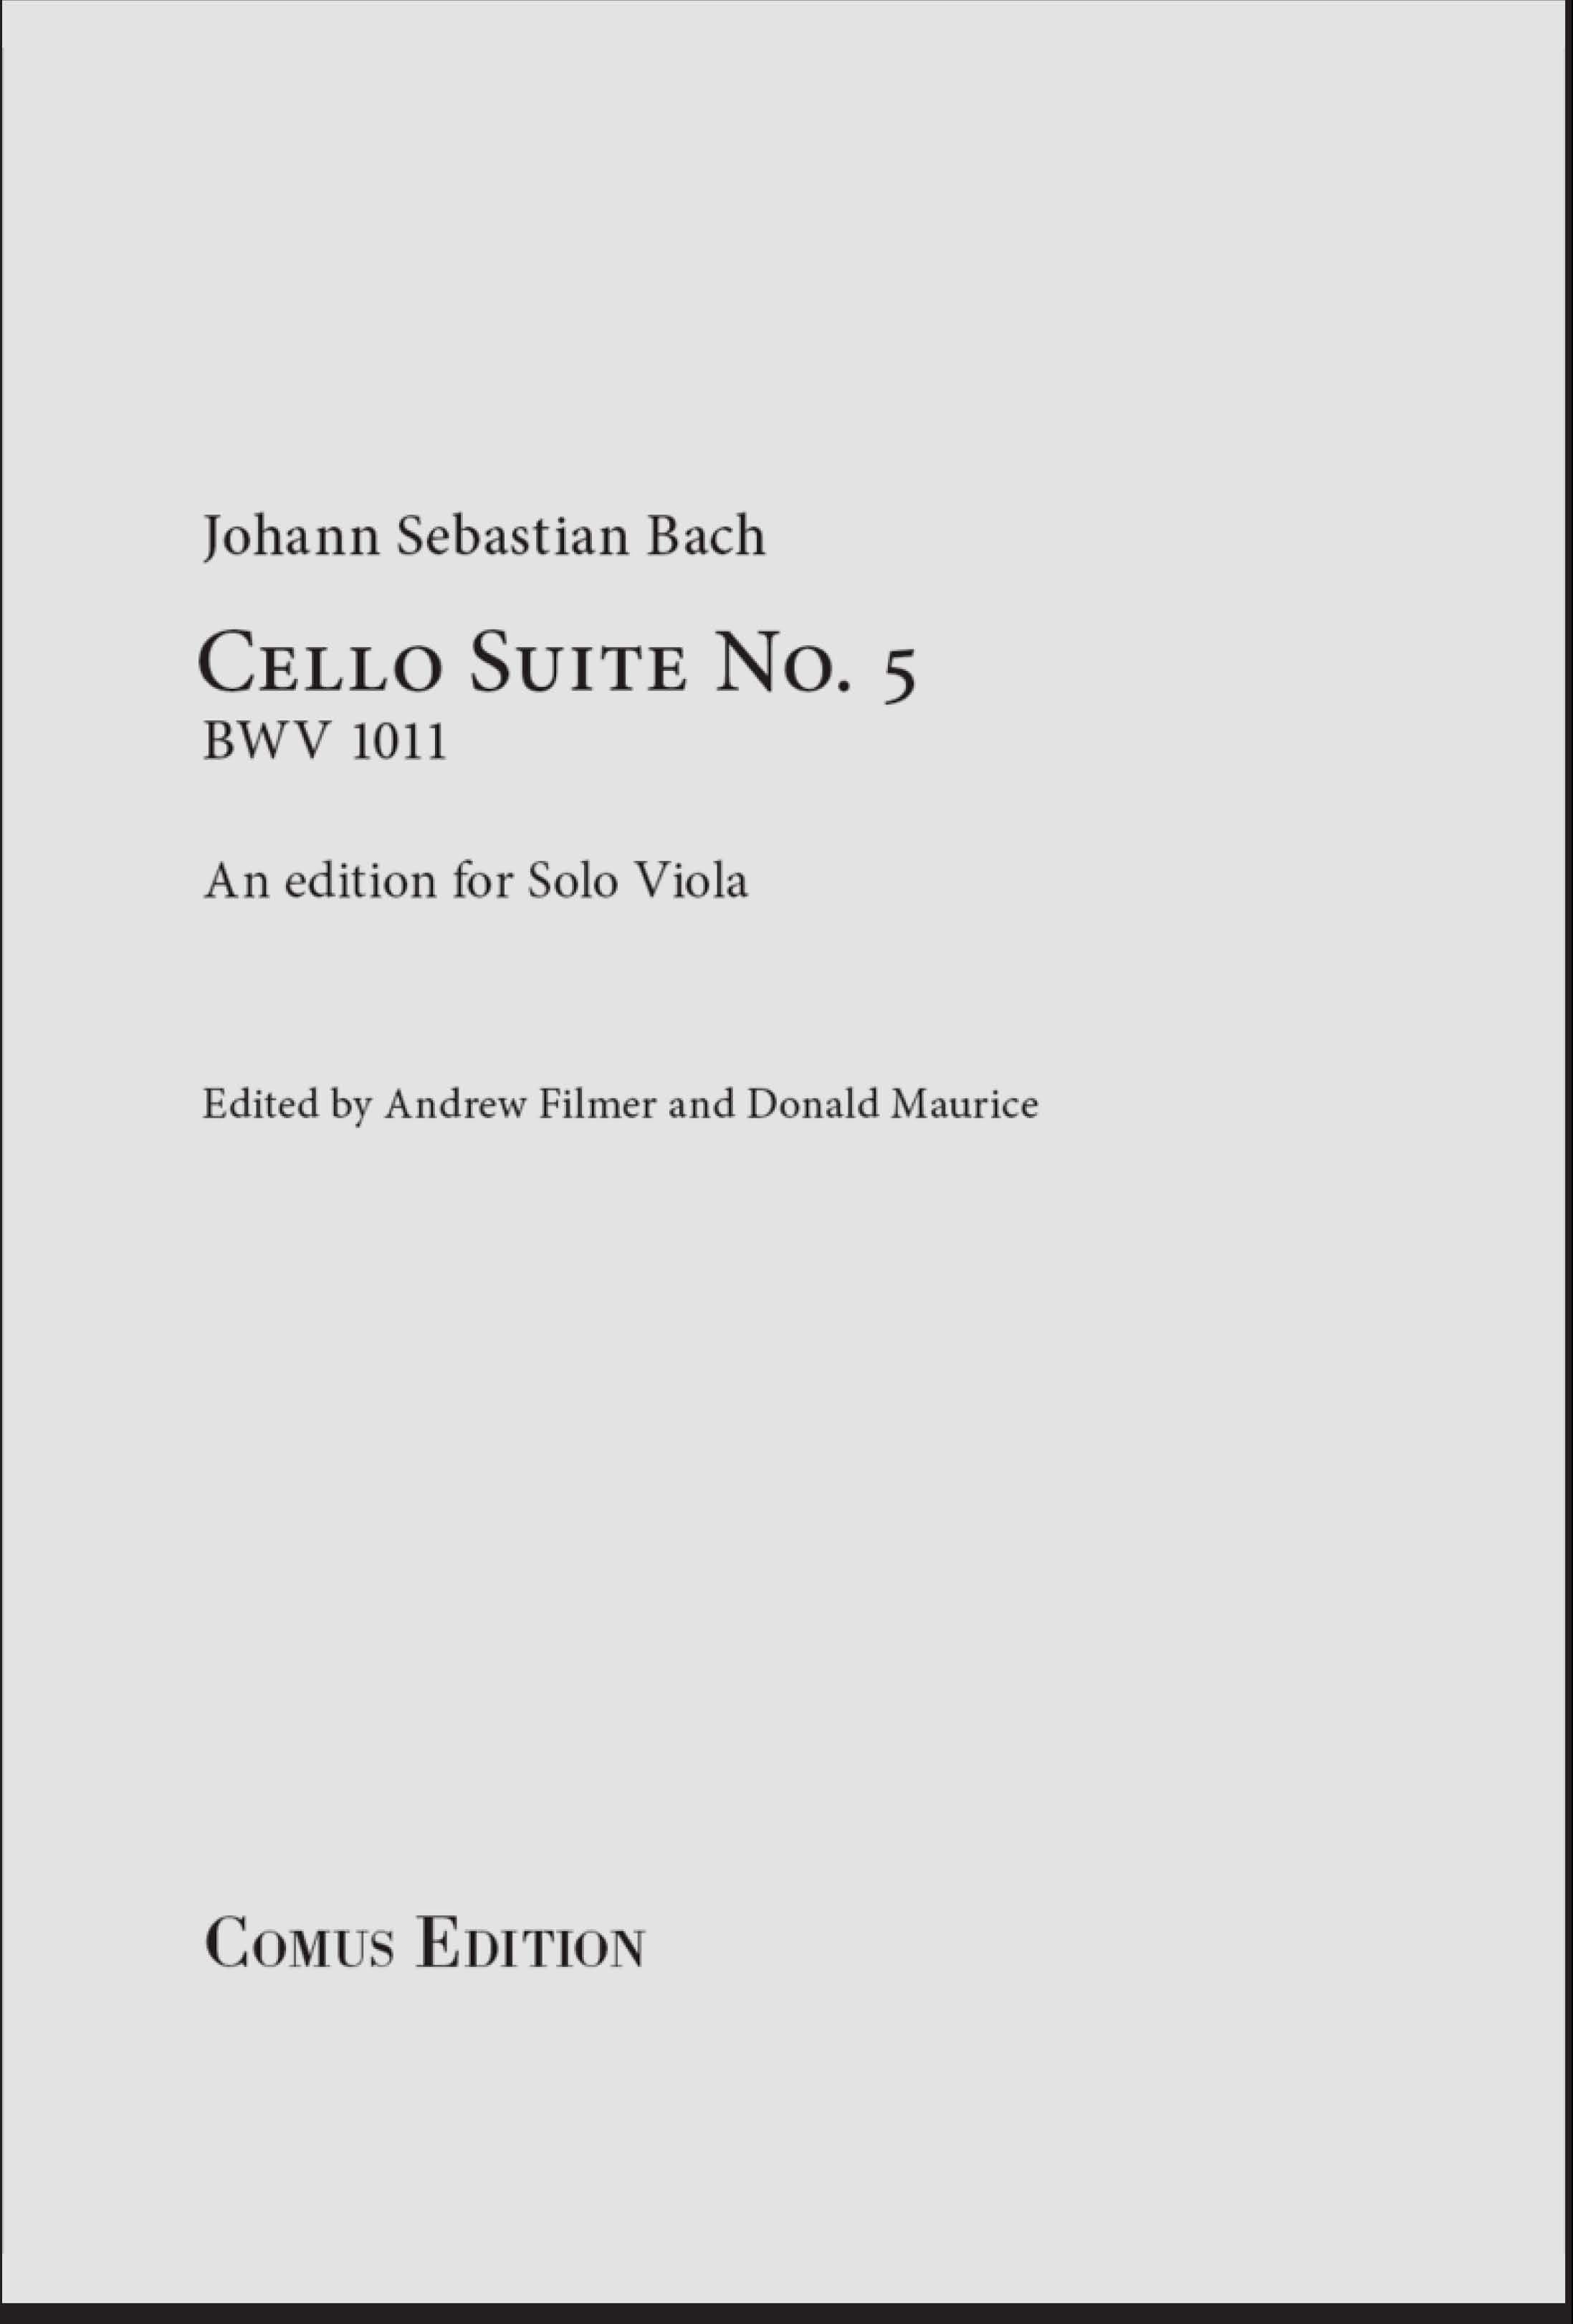 Outer cover of item Cello Suite No.5 (BWV 1011)